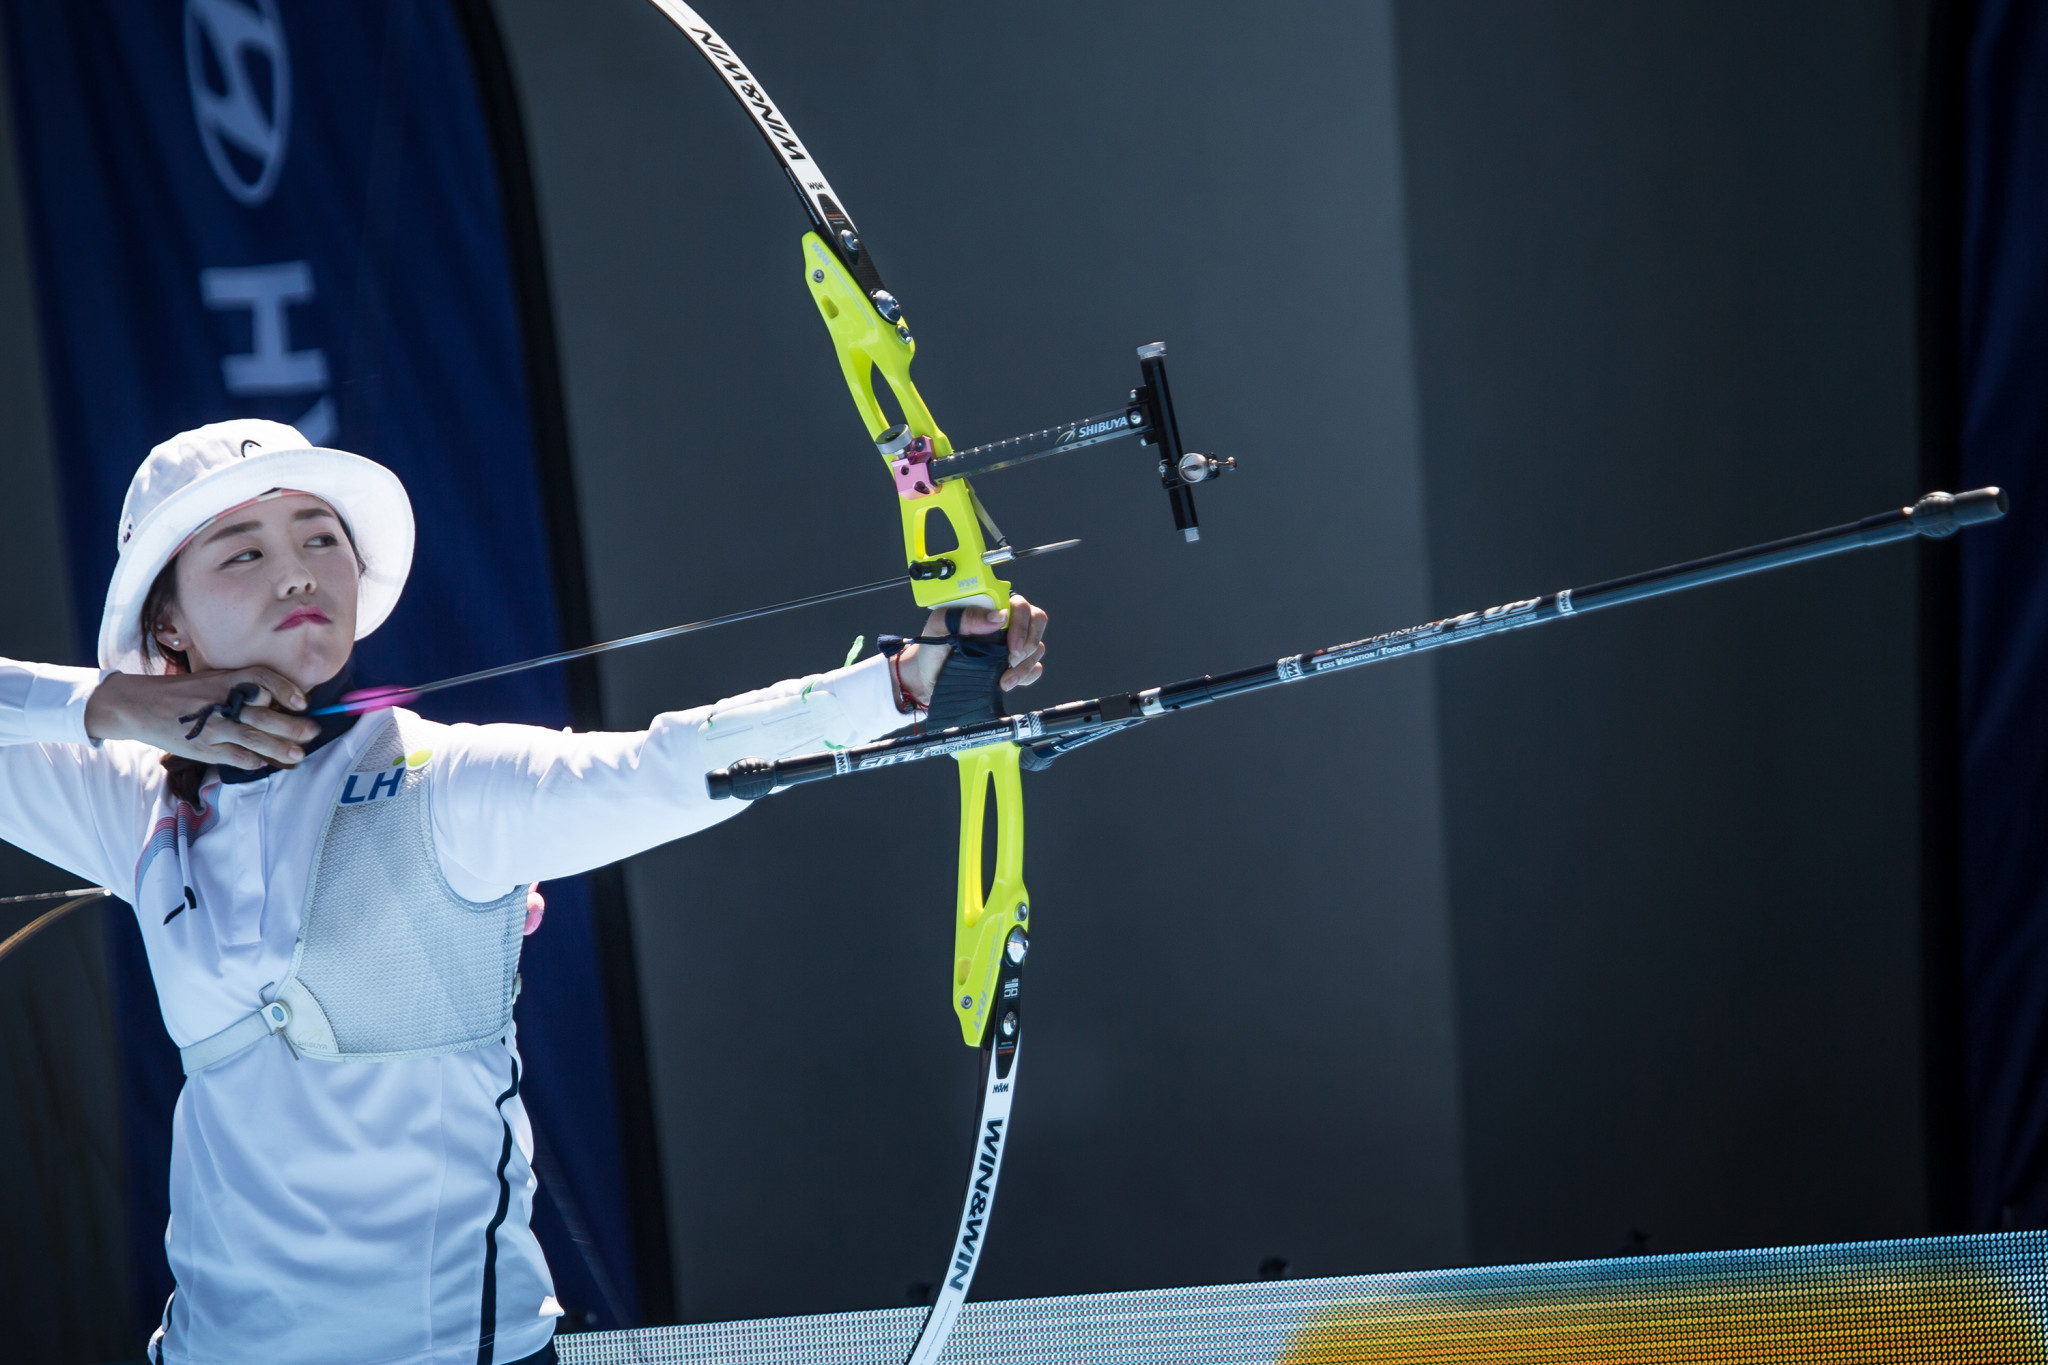 World Archery "disappointed" by WADA's removal of alcohol ban